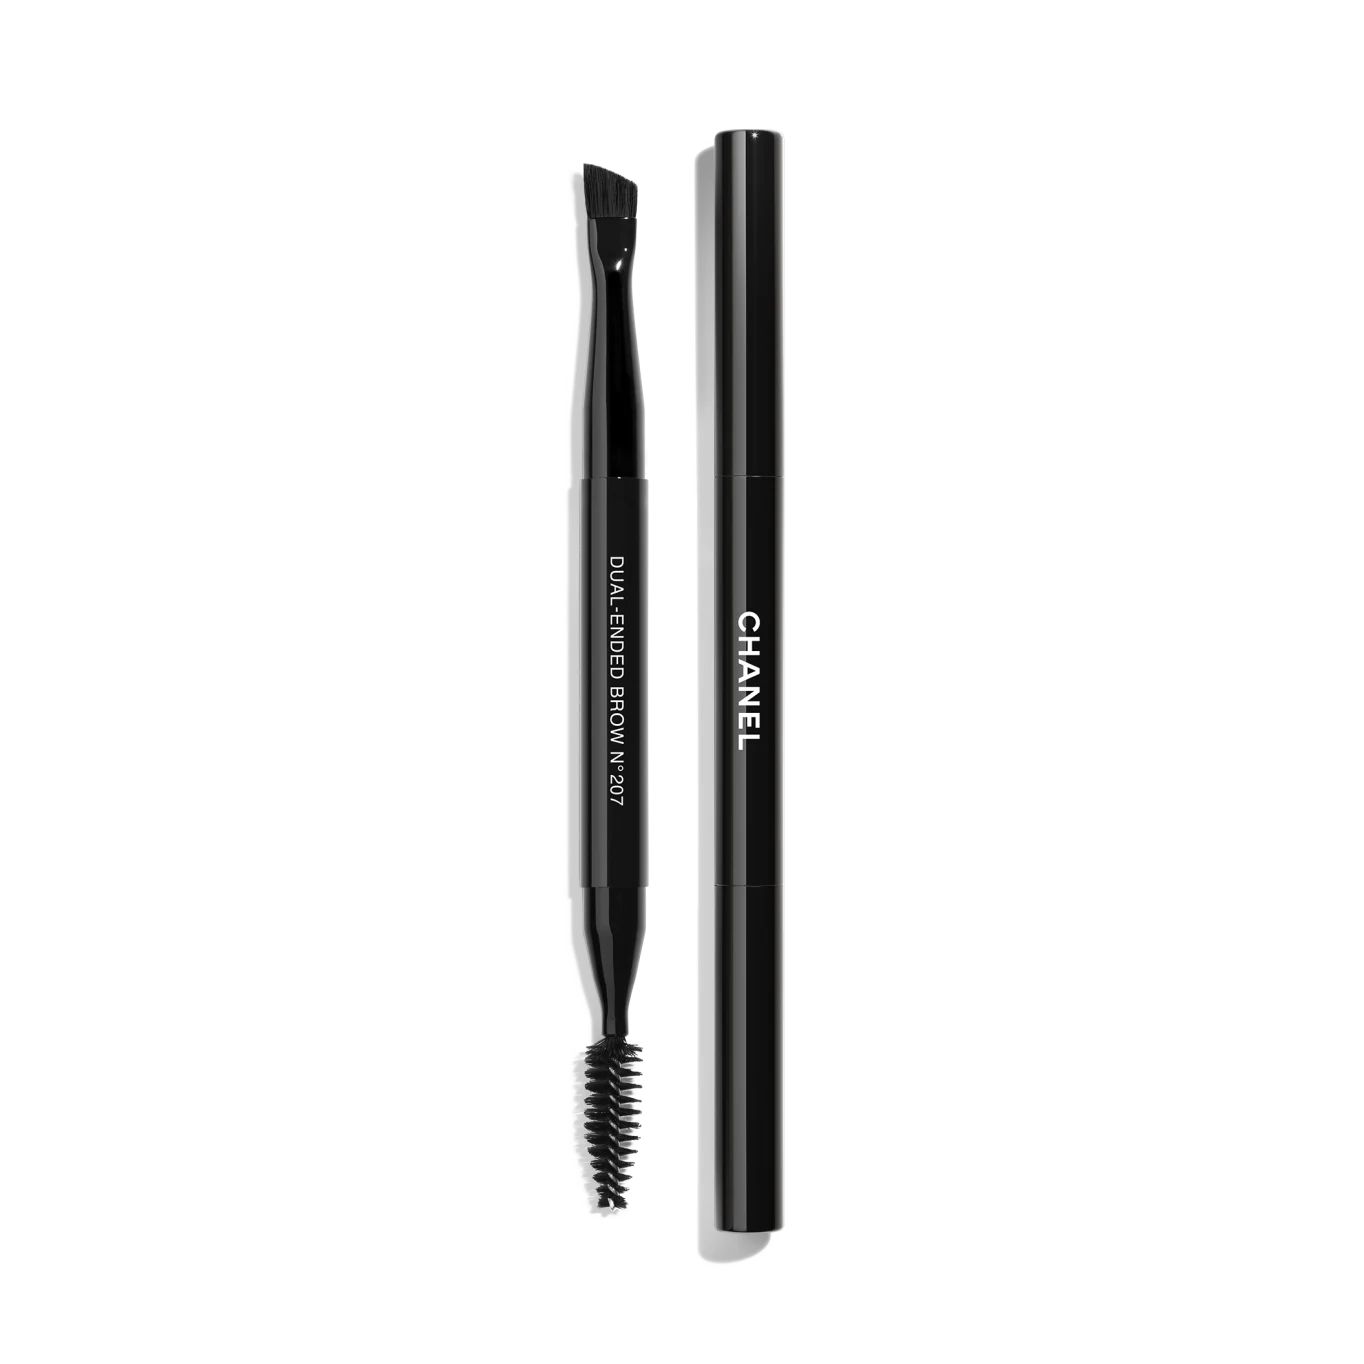 Dual-Ended Brow Brush N°207 | Chanel, Inc. (US)